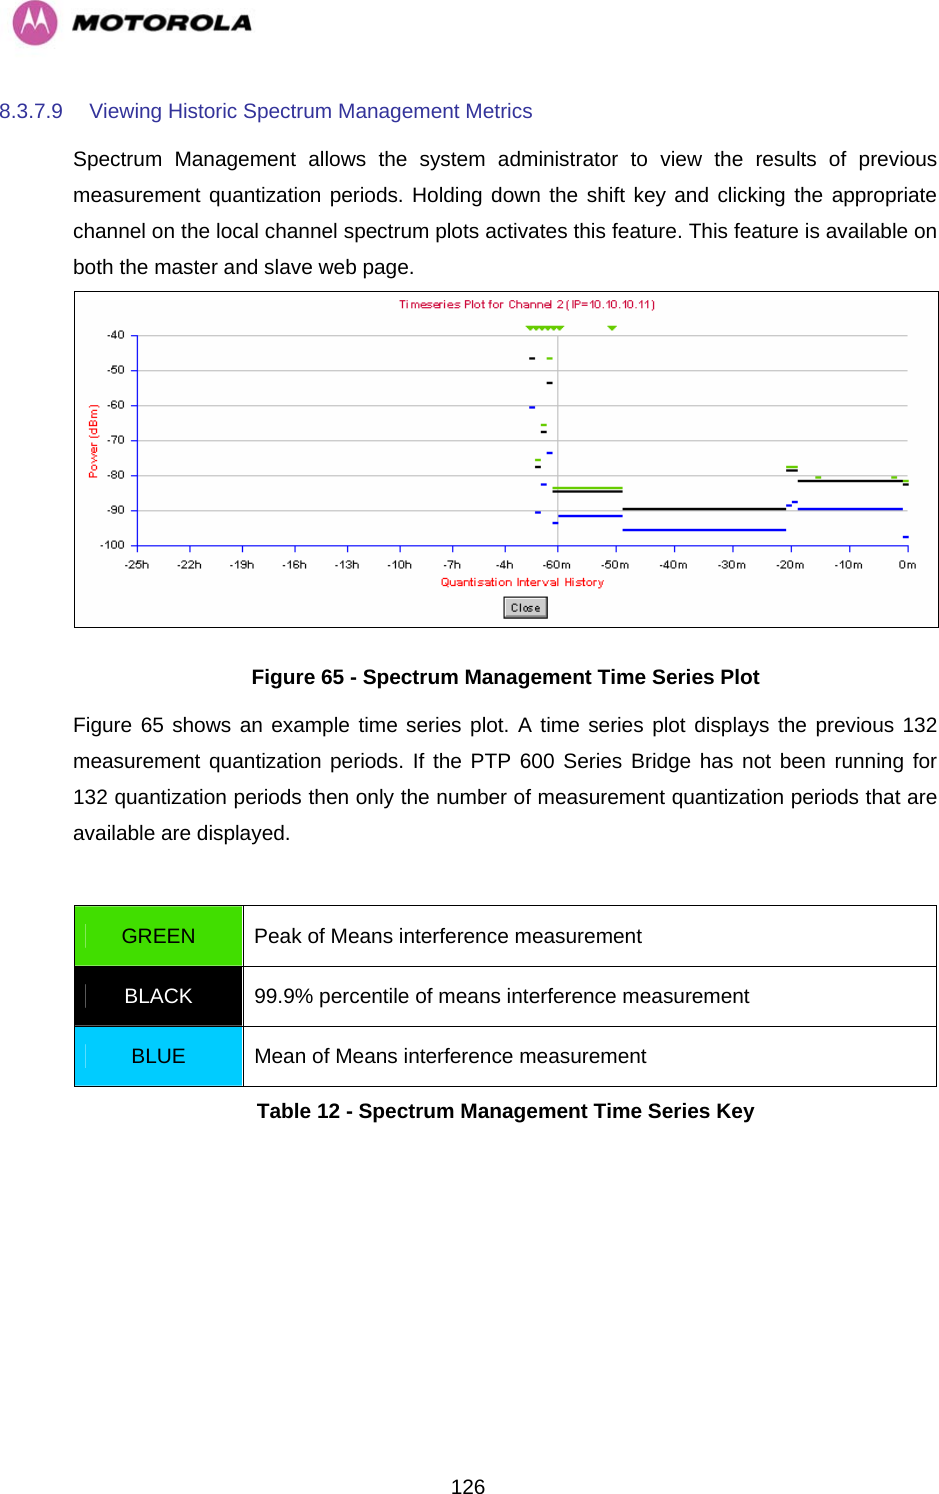   1268.3.7.9  Viewing Historic Spectrum Management Metrics Spectrum Management allows the system administrator to view the results of previous measurement quantization periods. Holding down the shift key and clicking the appropriate channel on the local channel spectrum plots activates this feature. This feature is available on both the master and slave web page.  Figure 65 - Spectrum Management Time Series Plot Figure 65 shows an example time series plot. A time series plot displays the previous 132 measurement quantization periods. If the PTP 600 Series Bridge has not been running for 132 quantization periods then only the number of measurement quantization periods that are available are displayed.   GREEN  Peak of Means interference measurement BLACK  99.9% percentile of means interference measurement BLUE  Mean of Means interference measurement Table 12 - Spectrum Management Time Series Key  